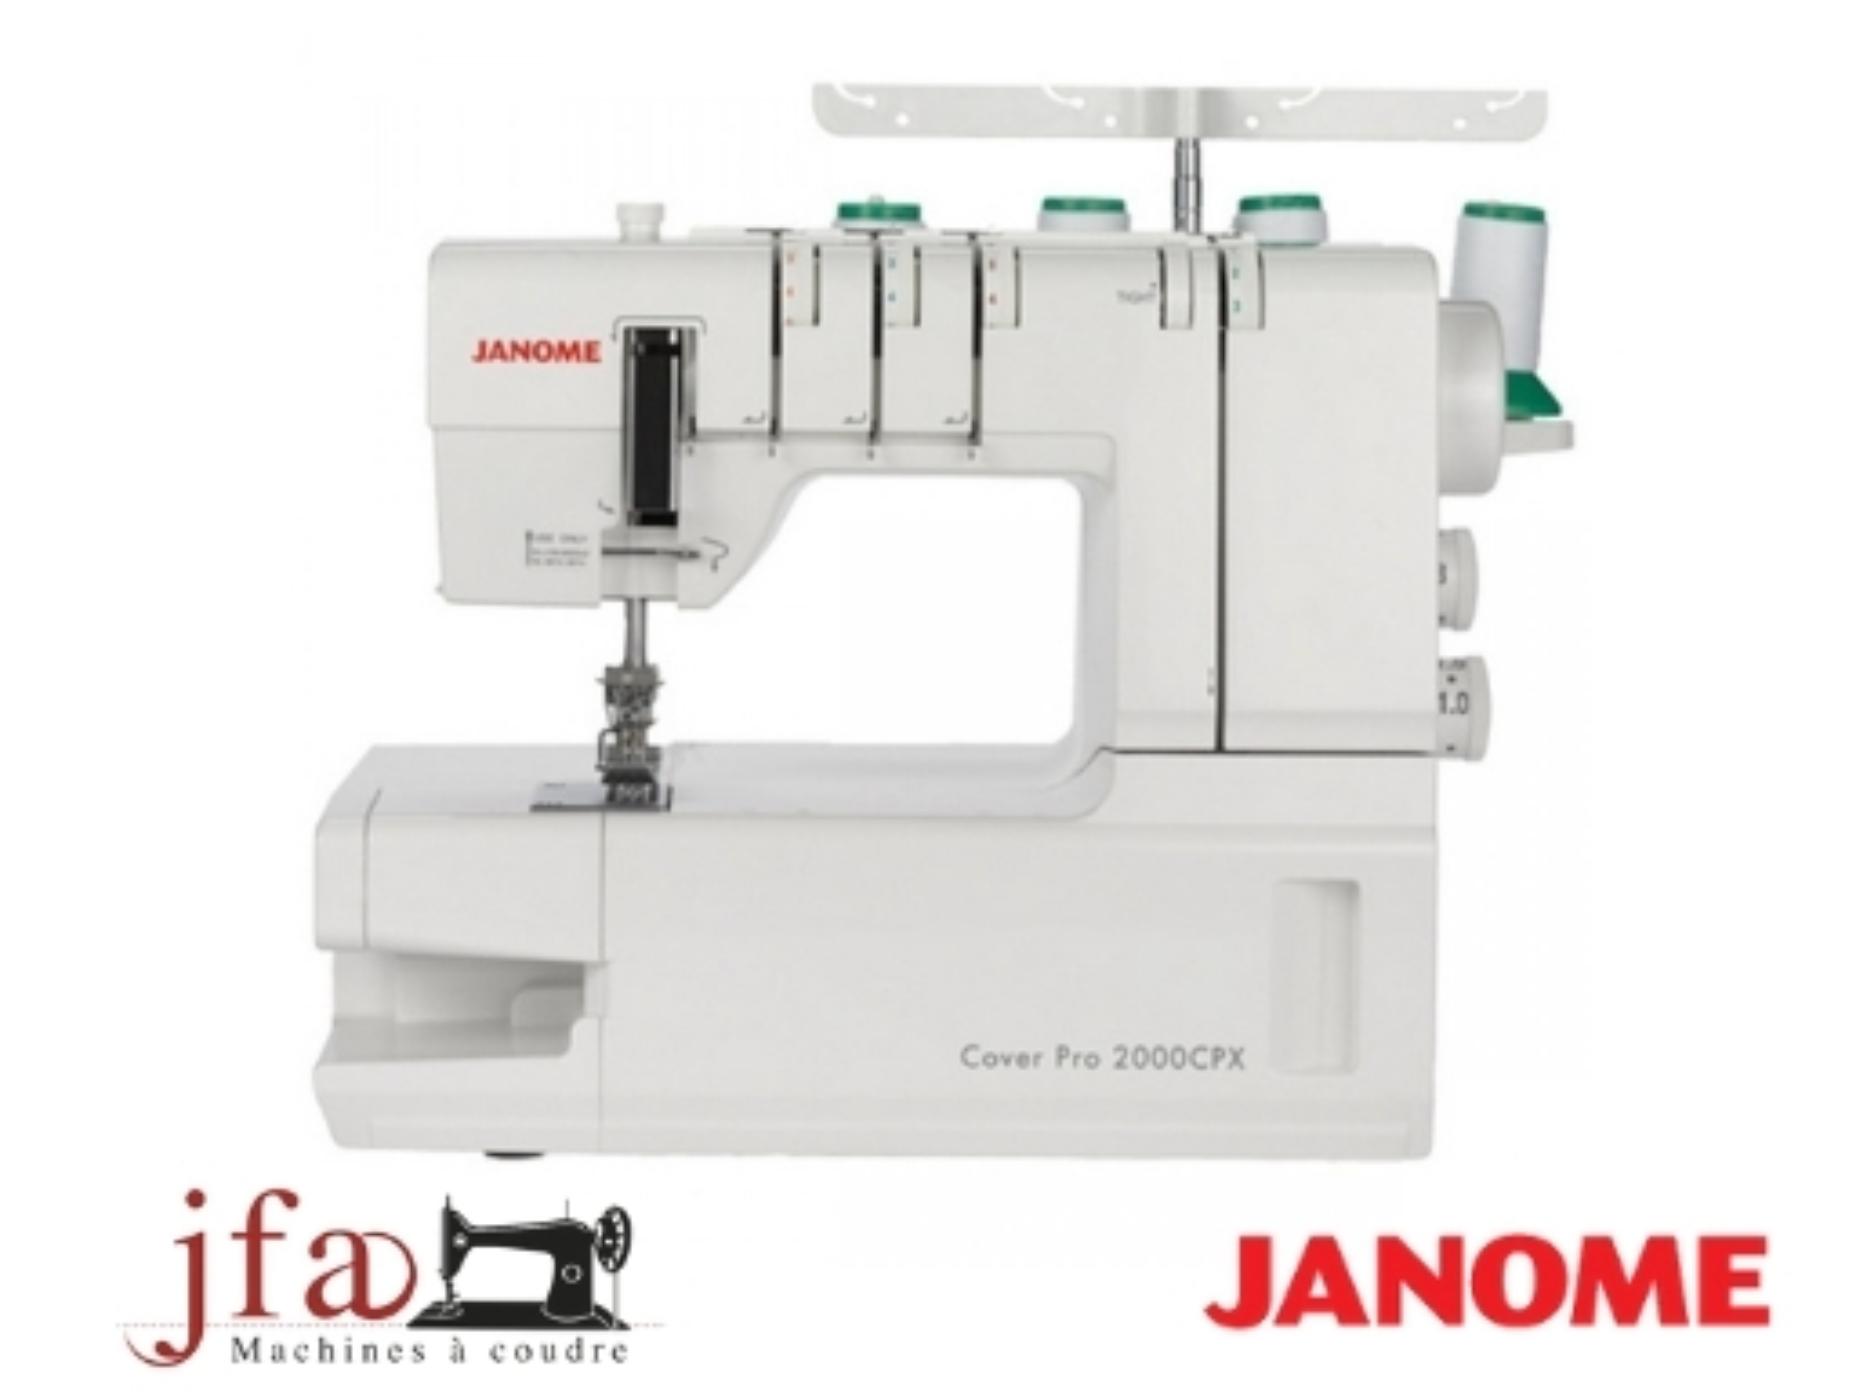 Recouvreuse Janome 2000 CPX